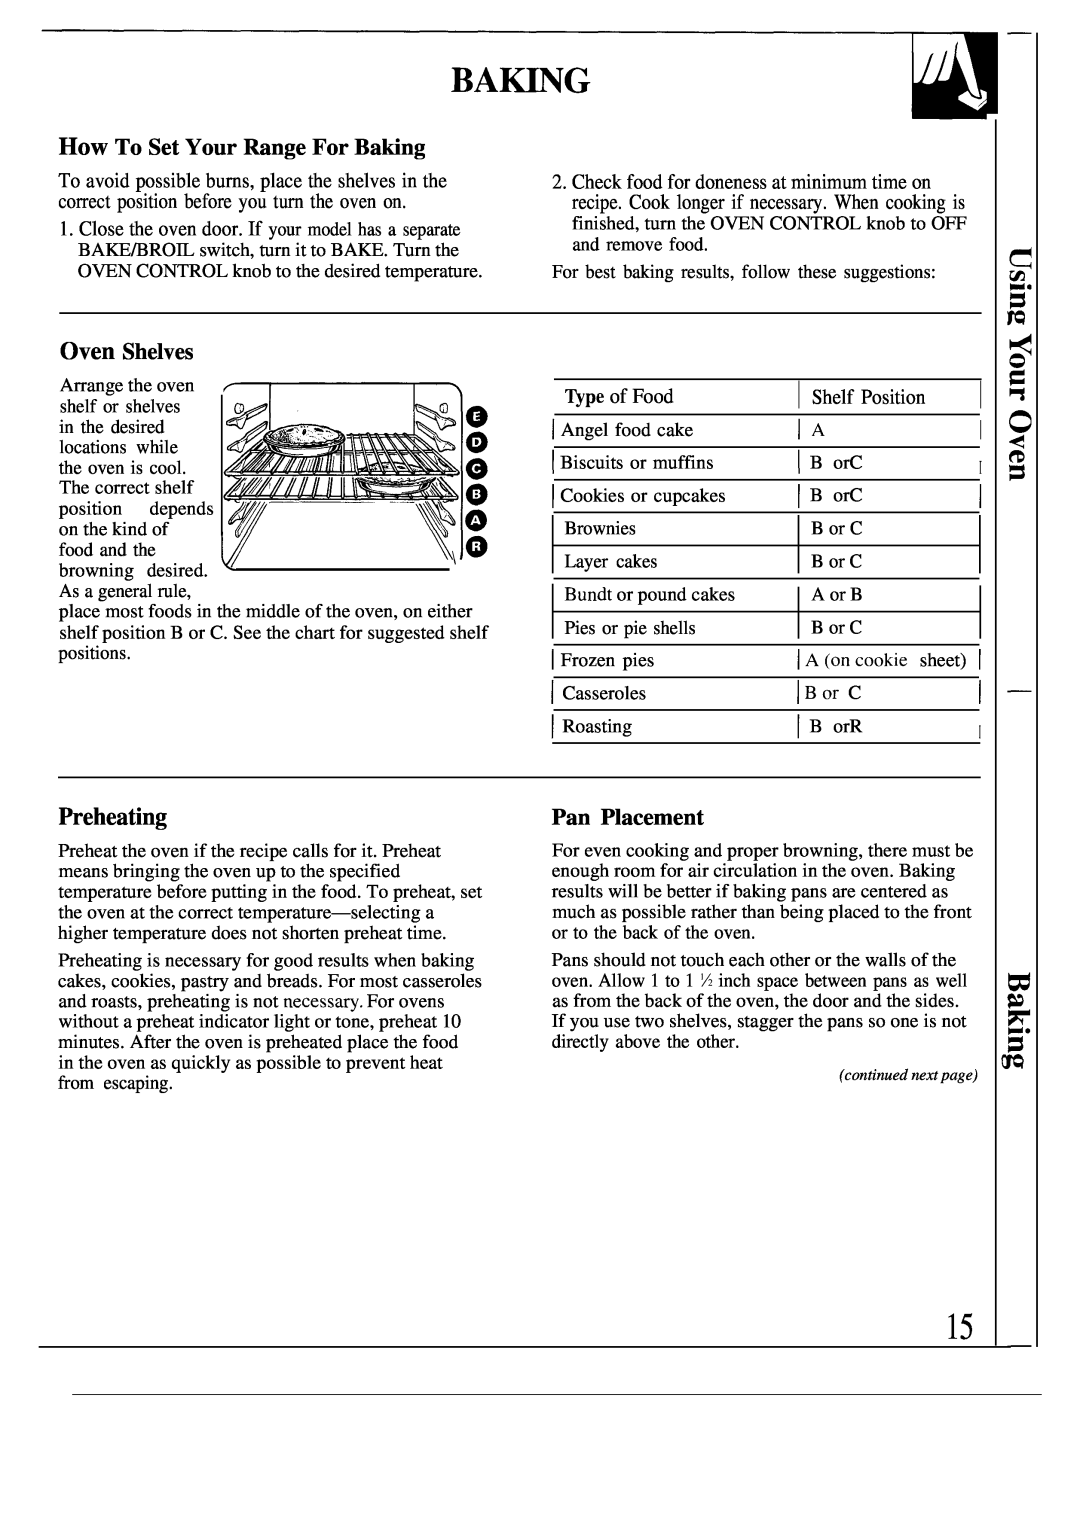 GE JGBS02PN, JGSS05GES, JGSS05GER, JGBS15GER manual Preheating, How To Set Your Range For Baking, Oven Shelves, Pan Placement 